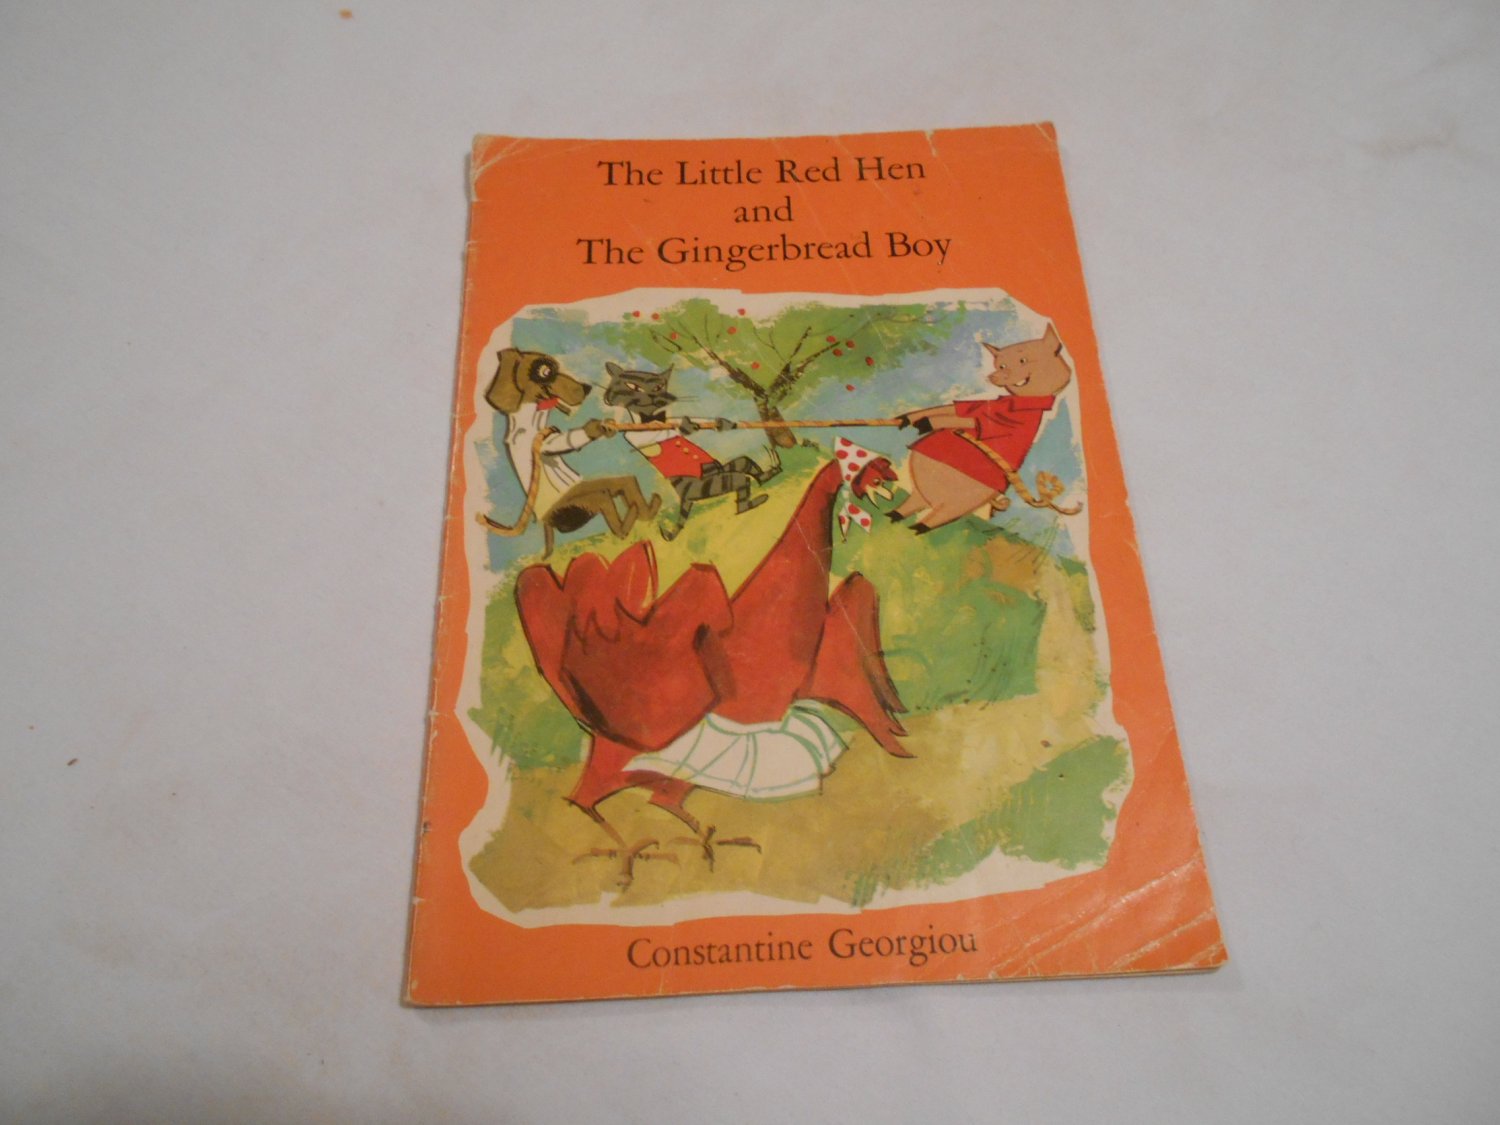 The Little Red Hen and The Gingerbread Boy by Constantine Georgiou (1963) (WC4)